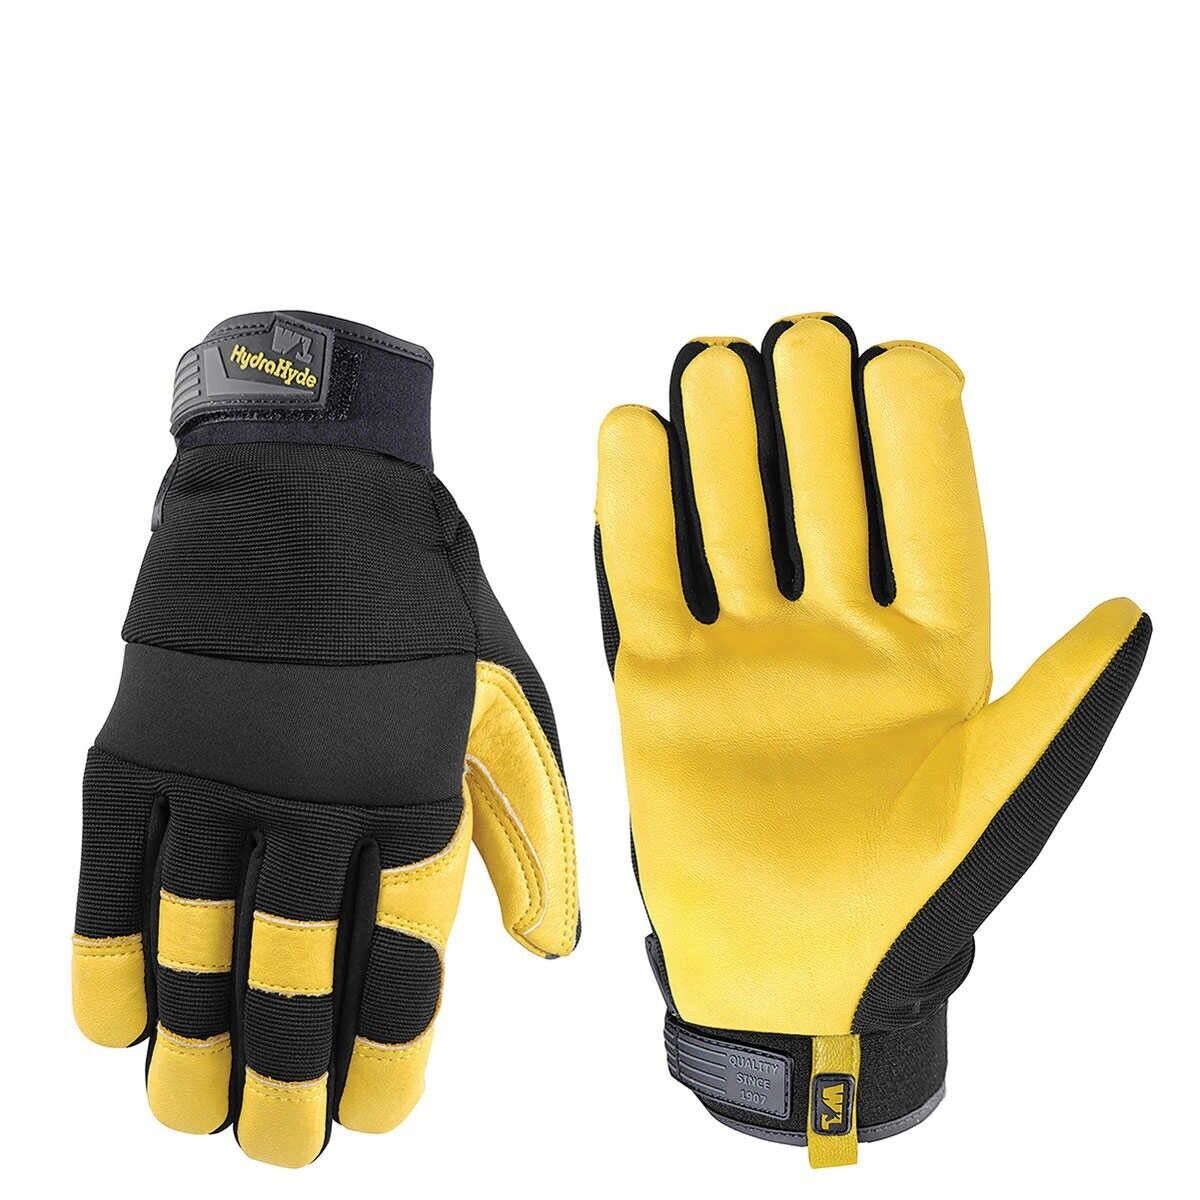 Primary image for Men's Wells Lamont HydraHyde Leather Work Gloves, Multiple Sizes, Black/Yellow